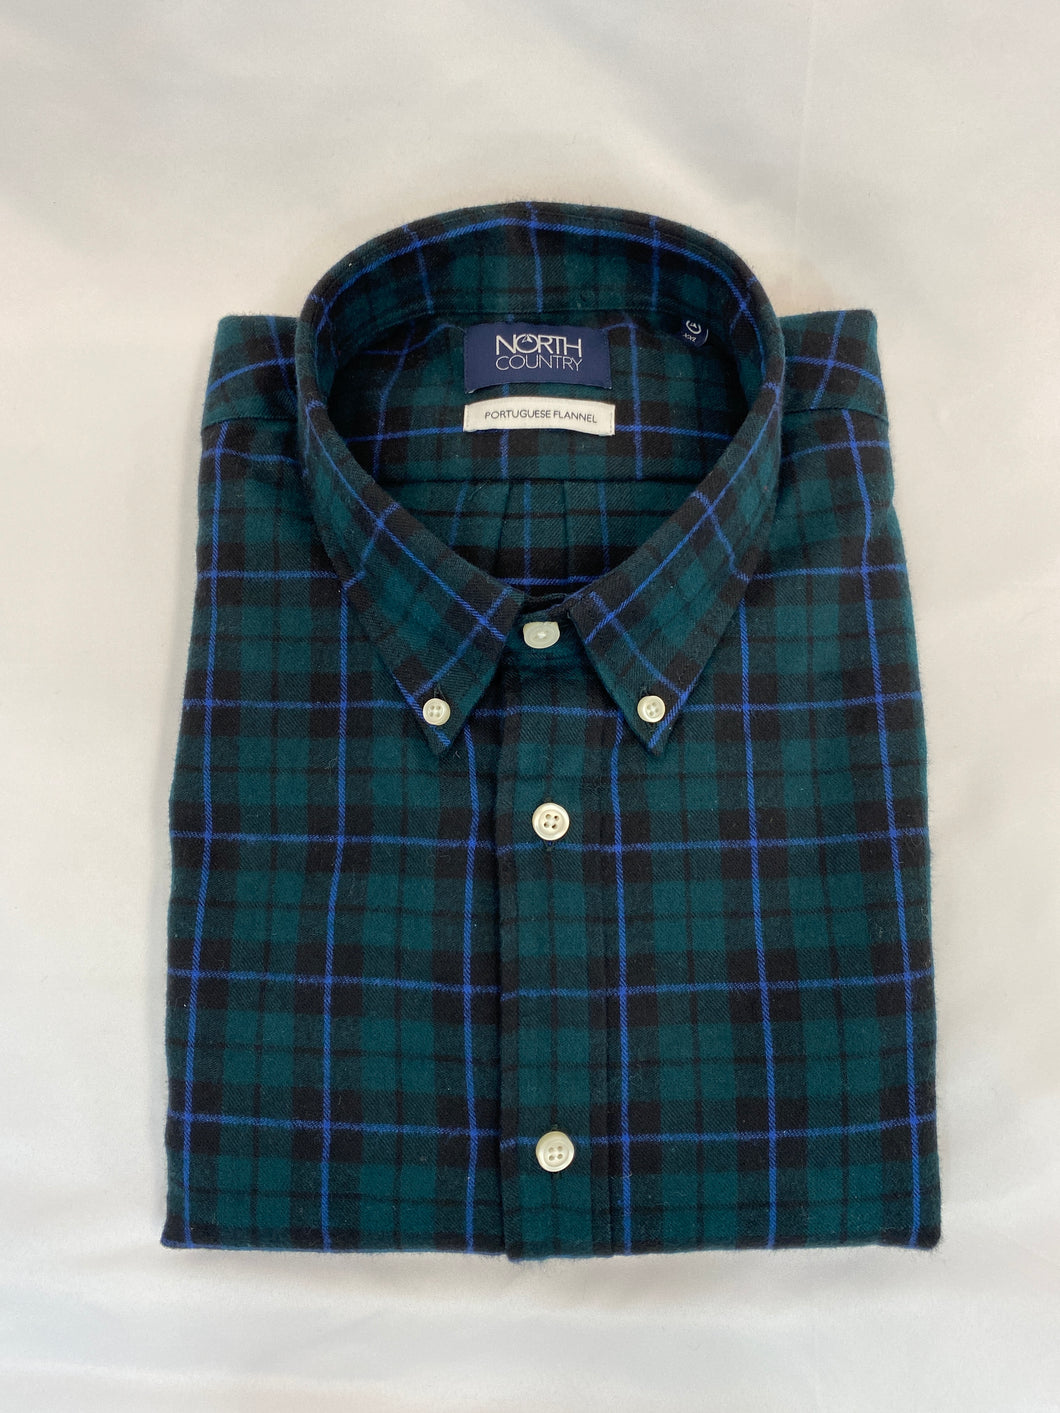 North Country Flannel Shirt Button Down Collar Blackwatch Plaid